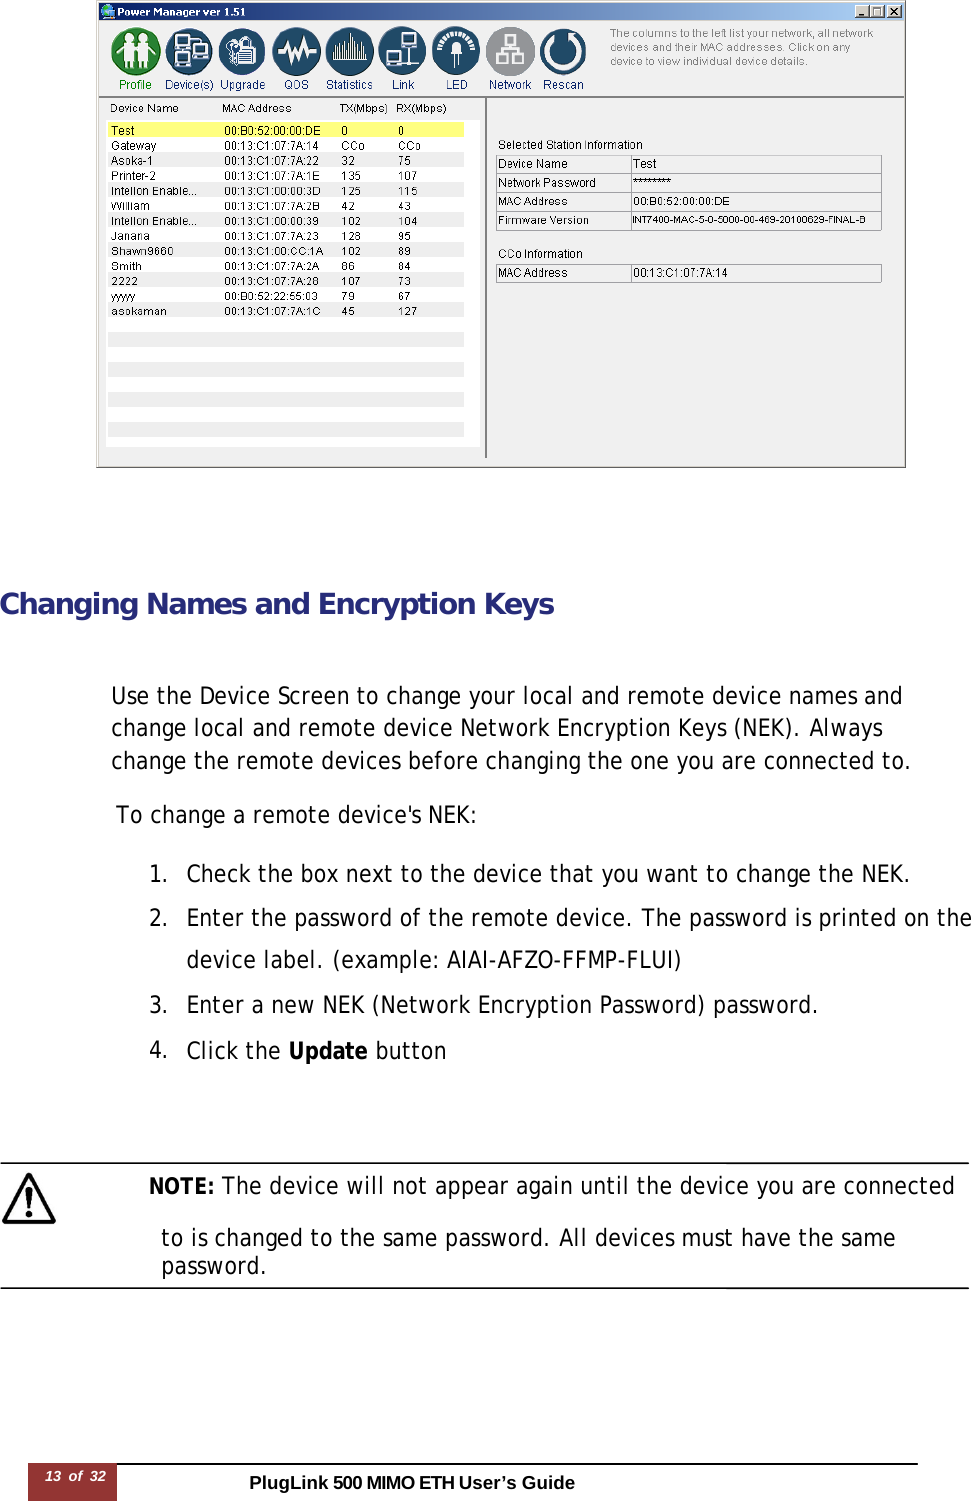 PlugLink 500 MIMO ETH User’s Guide13 of 32         Changing Names and Encryption Keys    Use the Device Screen to change your local and remote device names and change local and remote device Network Encryption Keys (NEK). Always change the remote devices before changing the one you are connected to.  To change a remote device&apos;s NEK:  1. Check the box next to the device that you want to change the NEK. 2. Enter the password of the remote device. The password is printed on the device label. (example: AIAI-AFZO-FFMP-FLUI) 3. Enter a new NEK (Network Encryption Password) password. 4. Click the Update button       NOTE: The device will not appear again until the device you are connected                   to is changed to the same password. All devices must have the same password. 